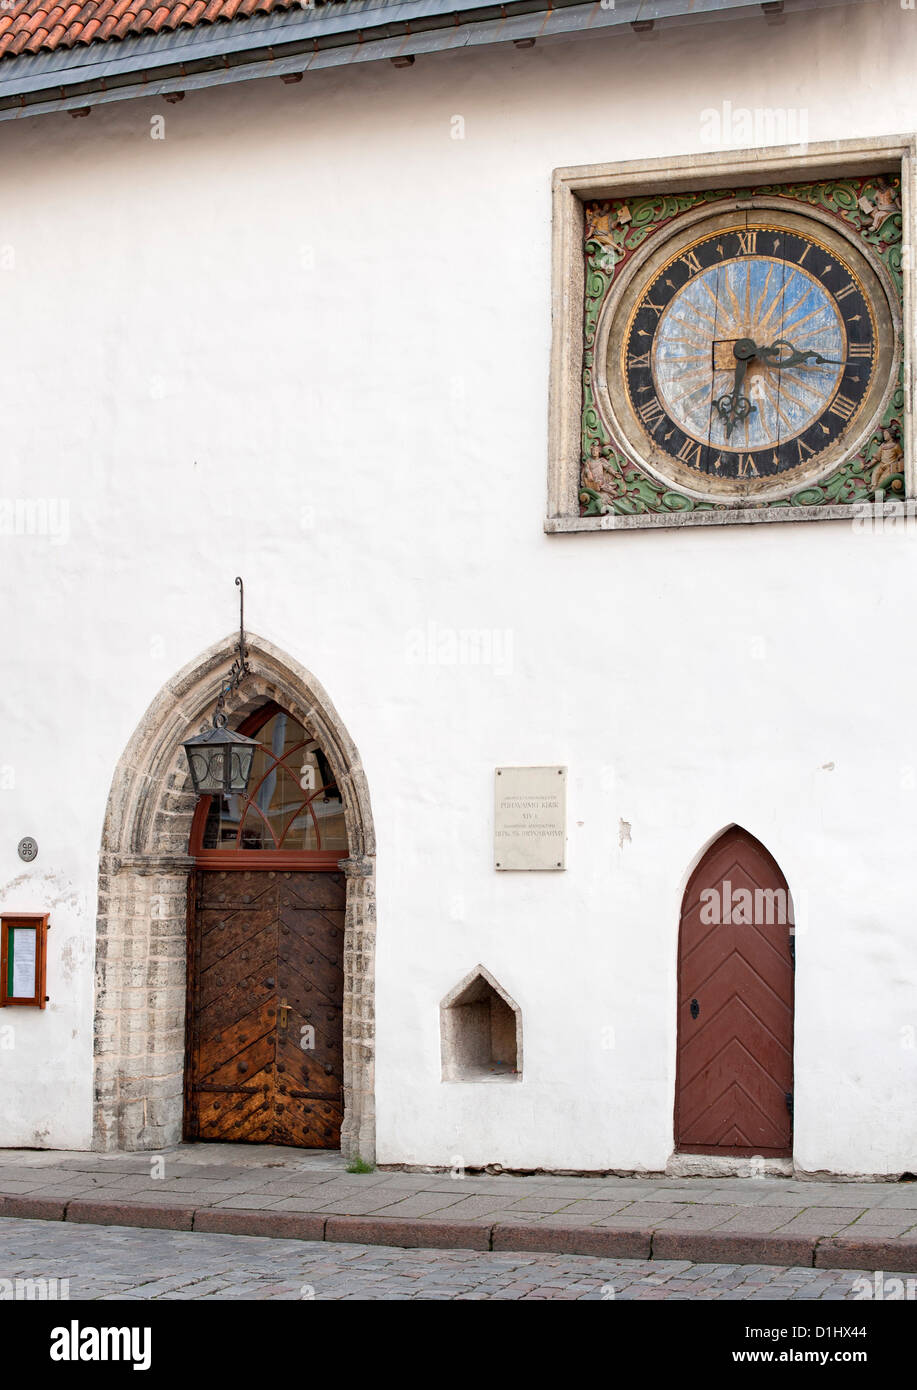 Clock on the wall of the Church of the Holy Spirit in Tallinn, the capital of Estonia. Stock Photo